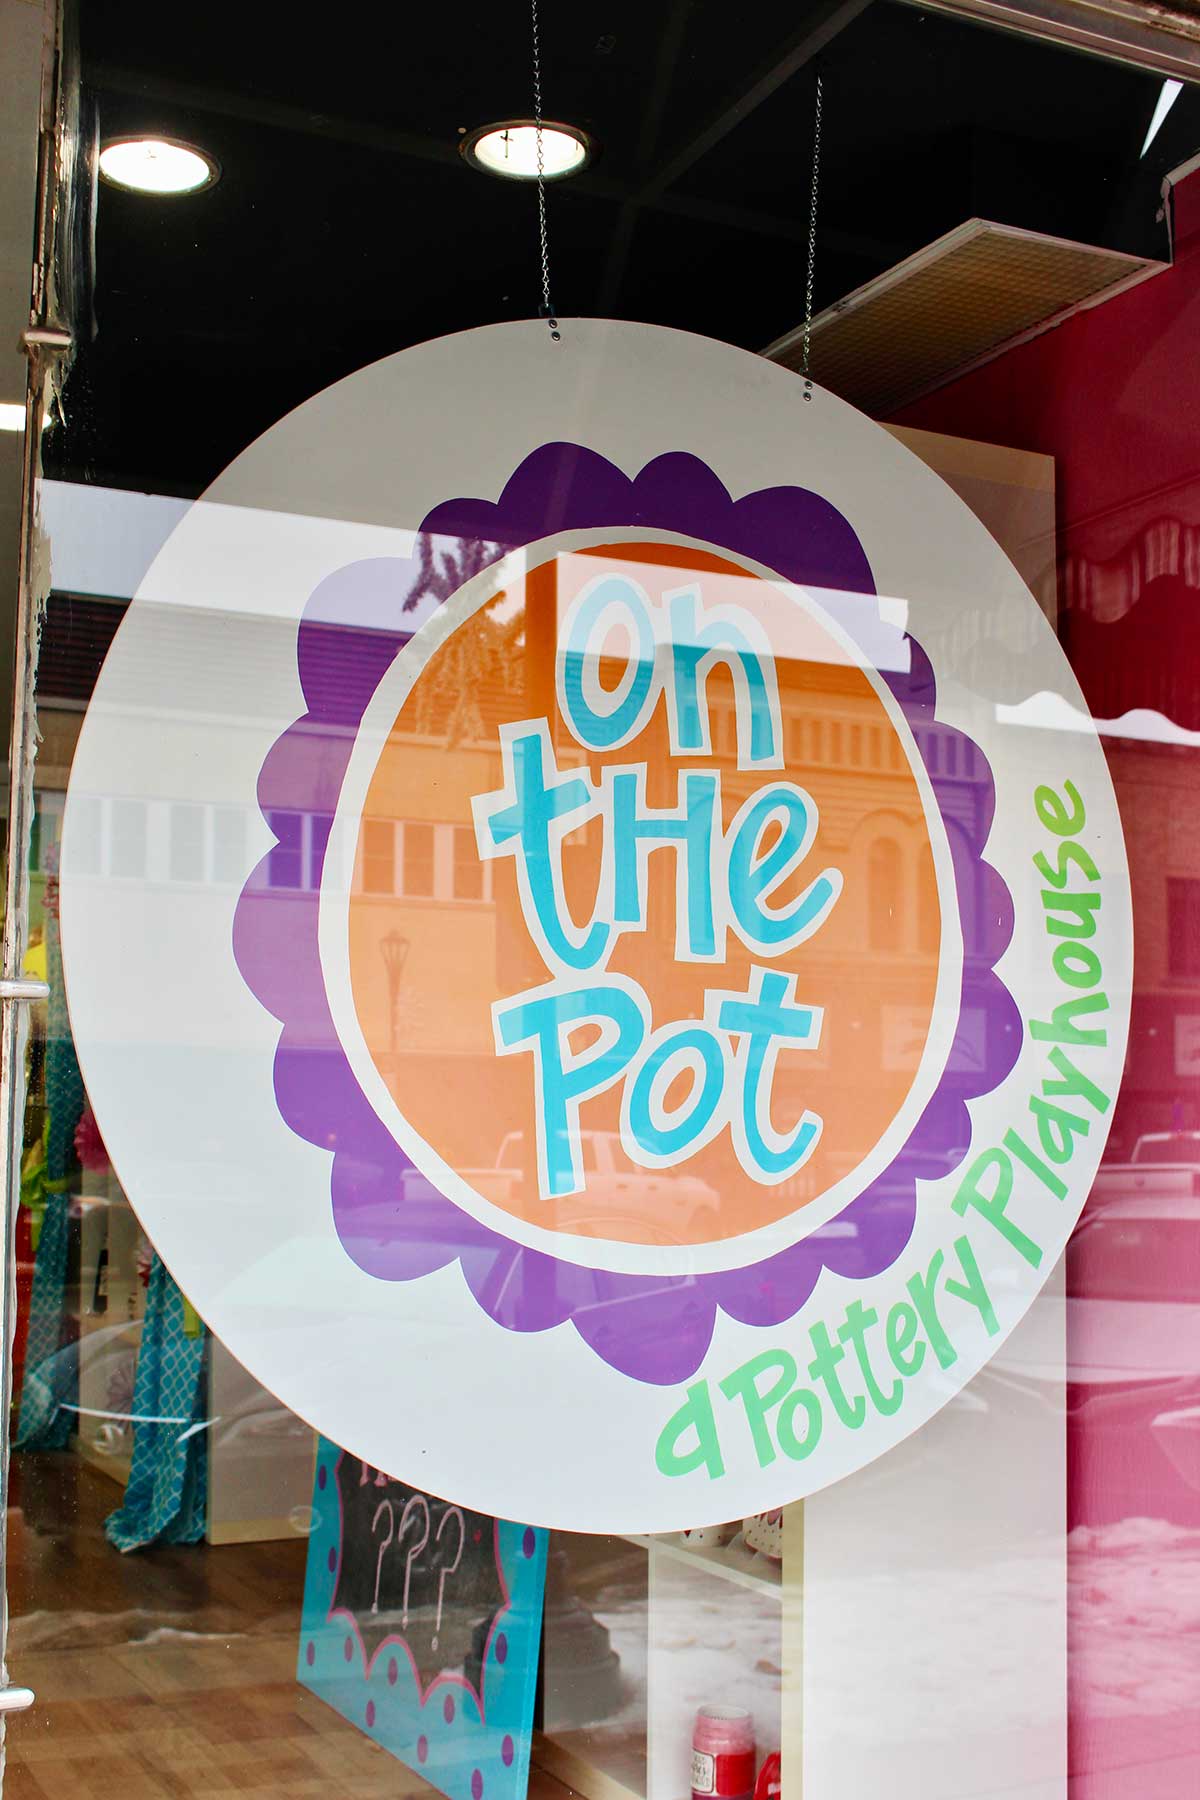 Window sign that says "On the Pot a Pottery Playhouse"